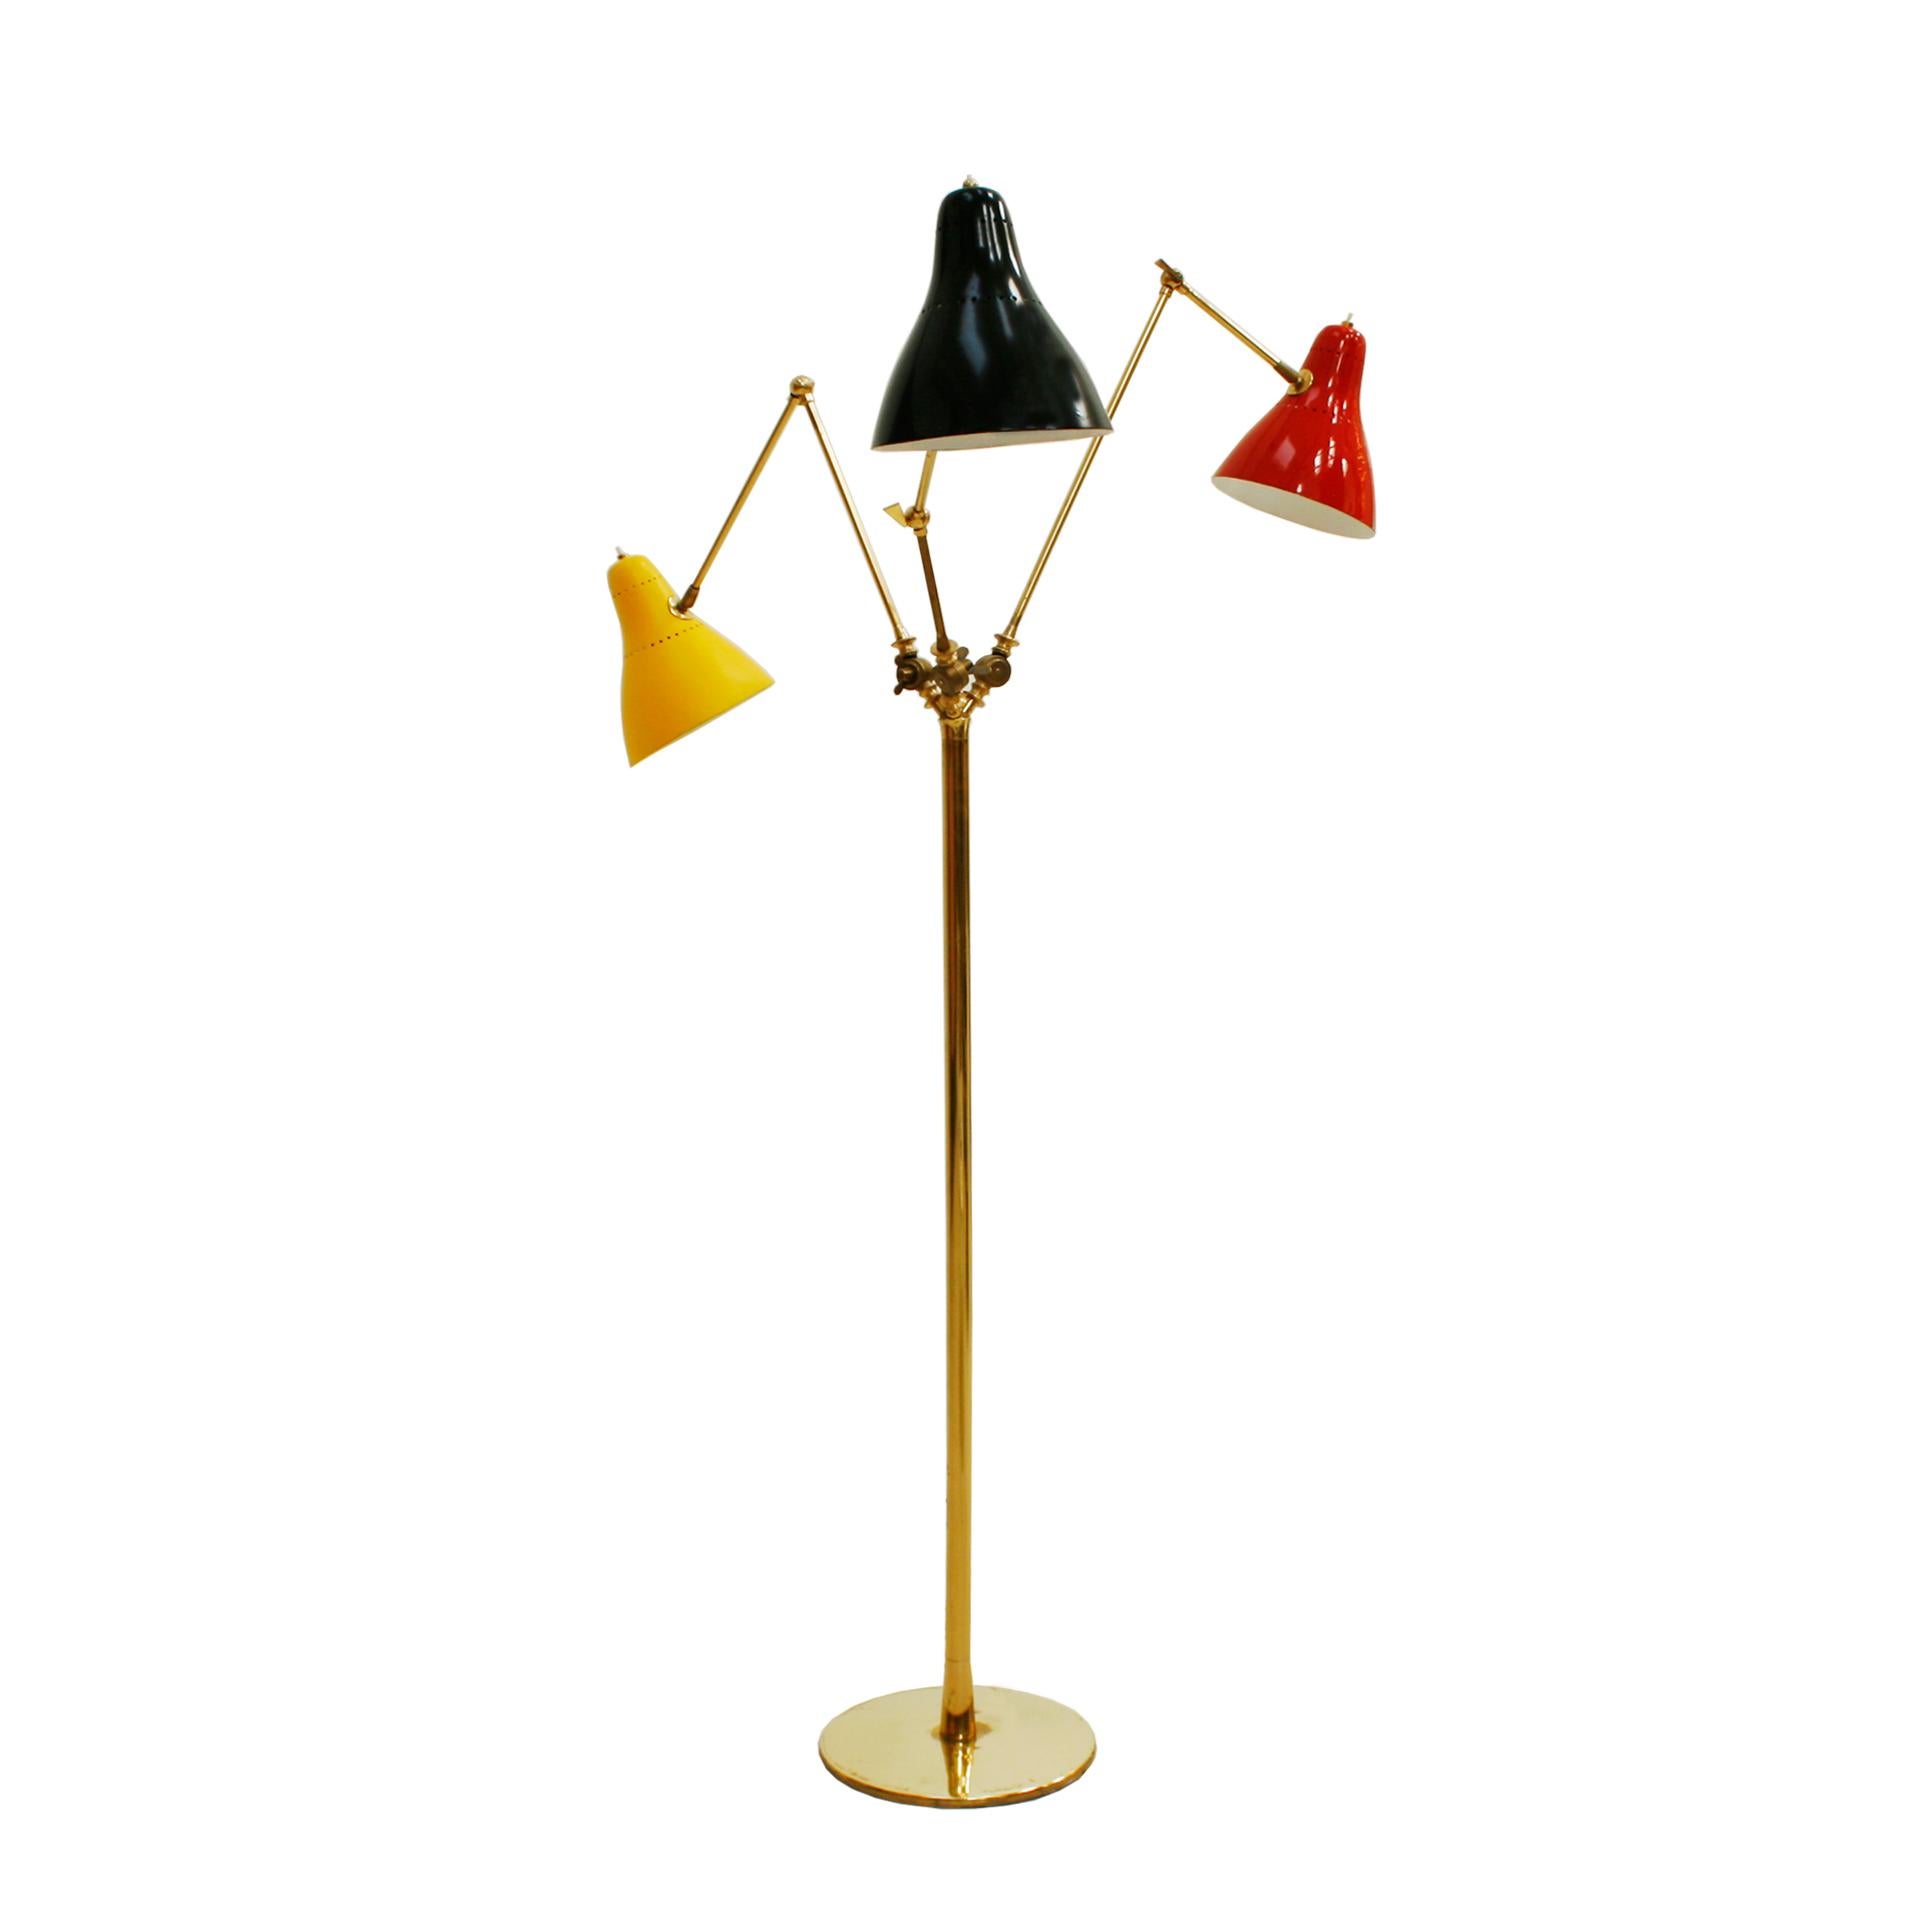 Mid-20th Century Mid-Century Modern Italian Floor Lamp, made of Brass with Colored Tulips, 1950 For Sale